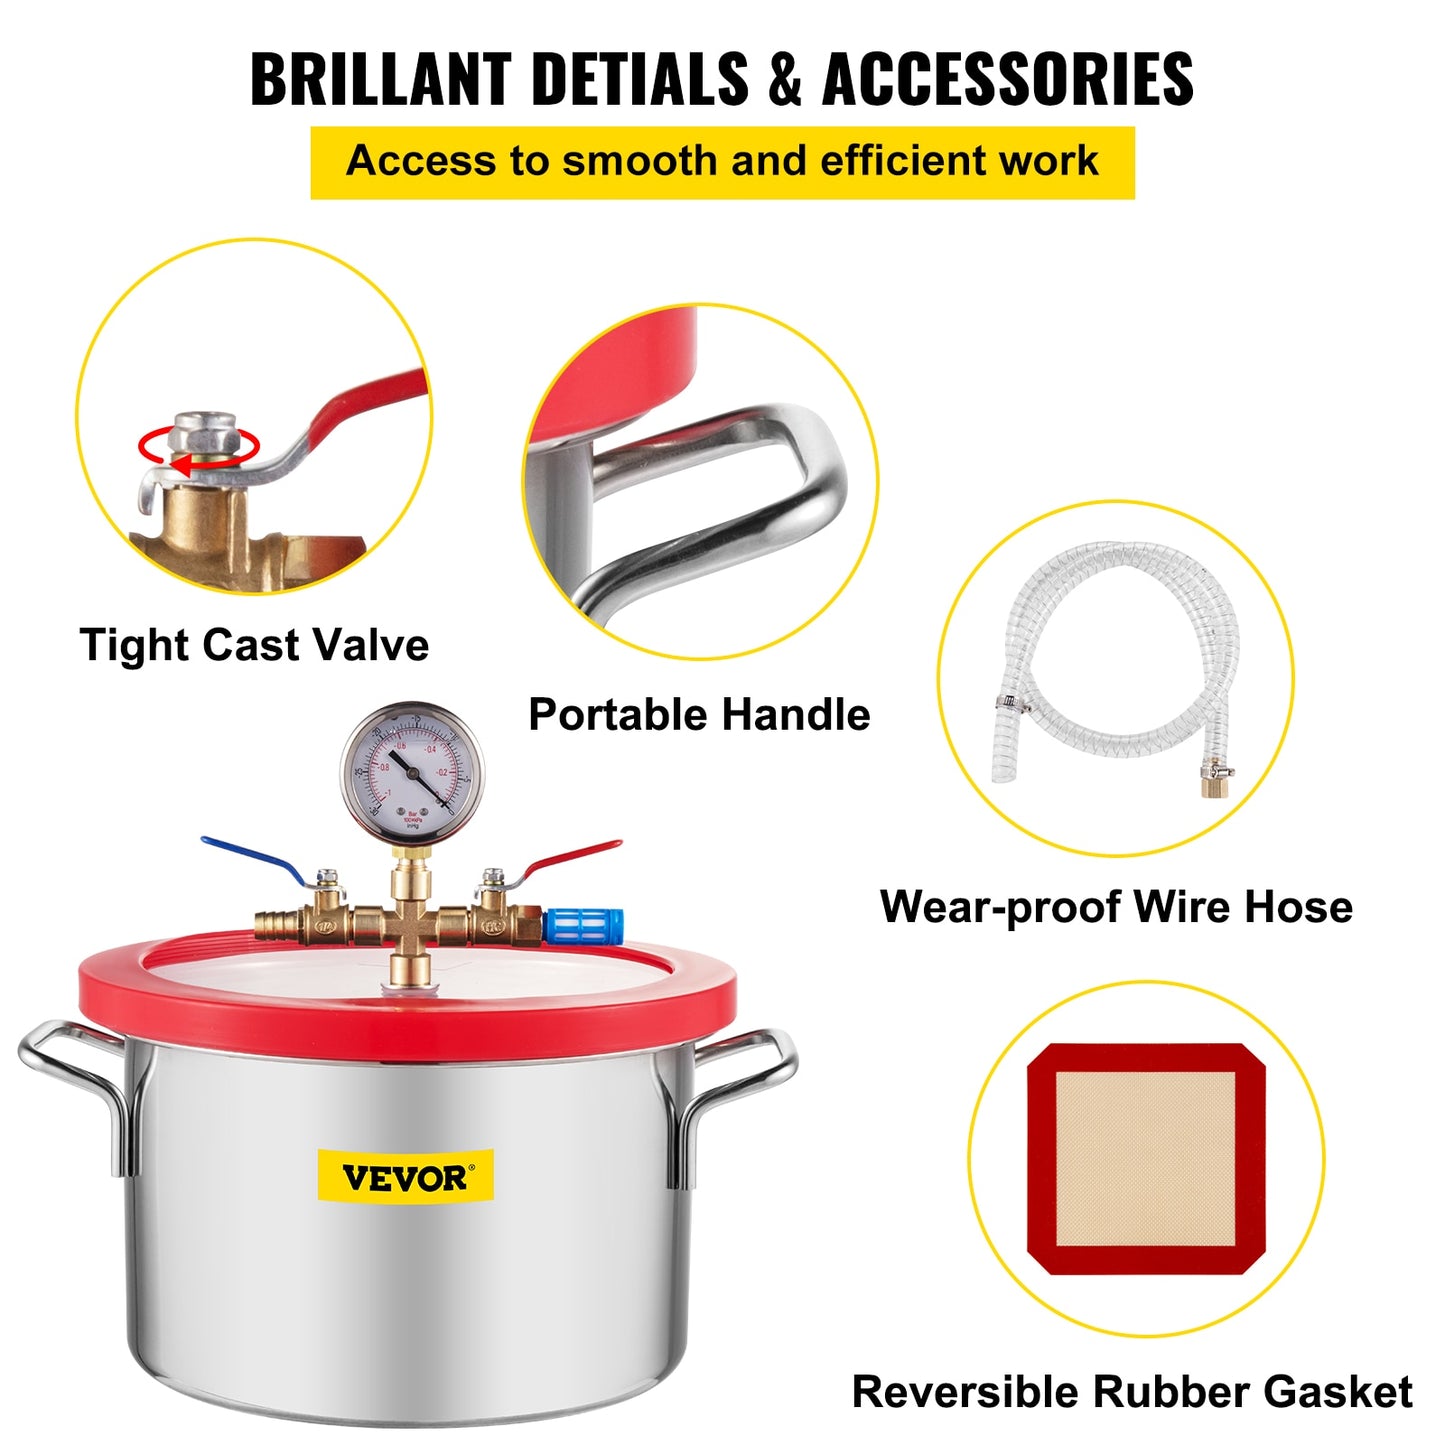 Stainless Steel Vacuum Chamber: Master the Art of Gas Extraction and Foil Protection with a 1.5-5 Gallon Capacity, Glass Lid, and Silicone Seals!